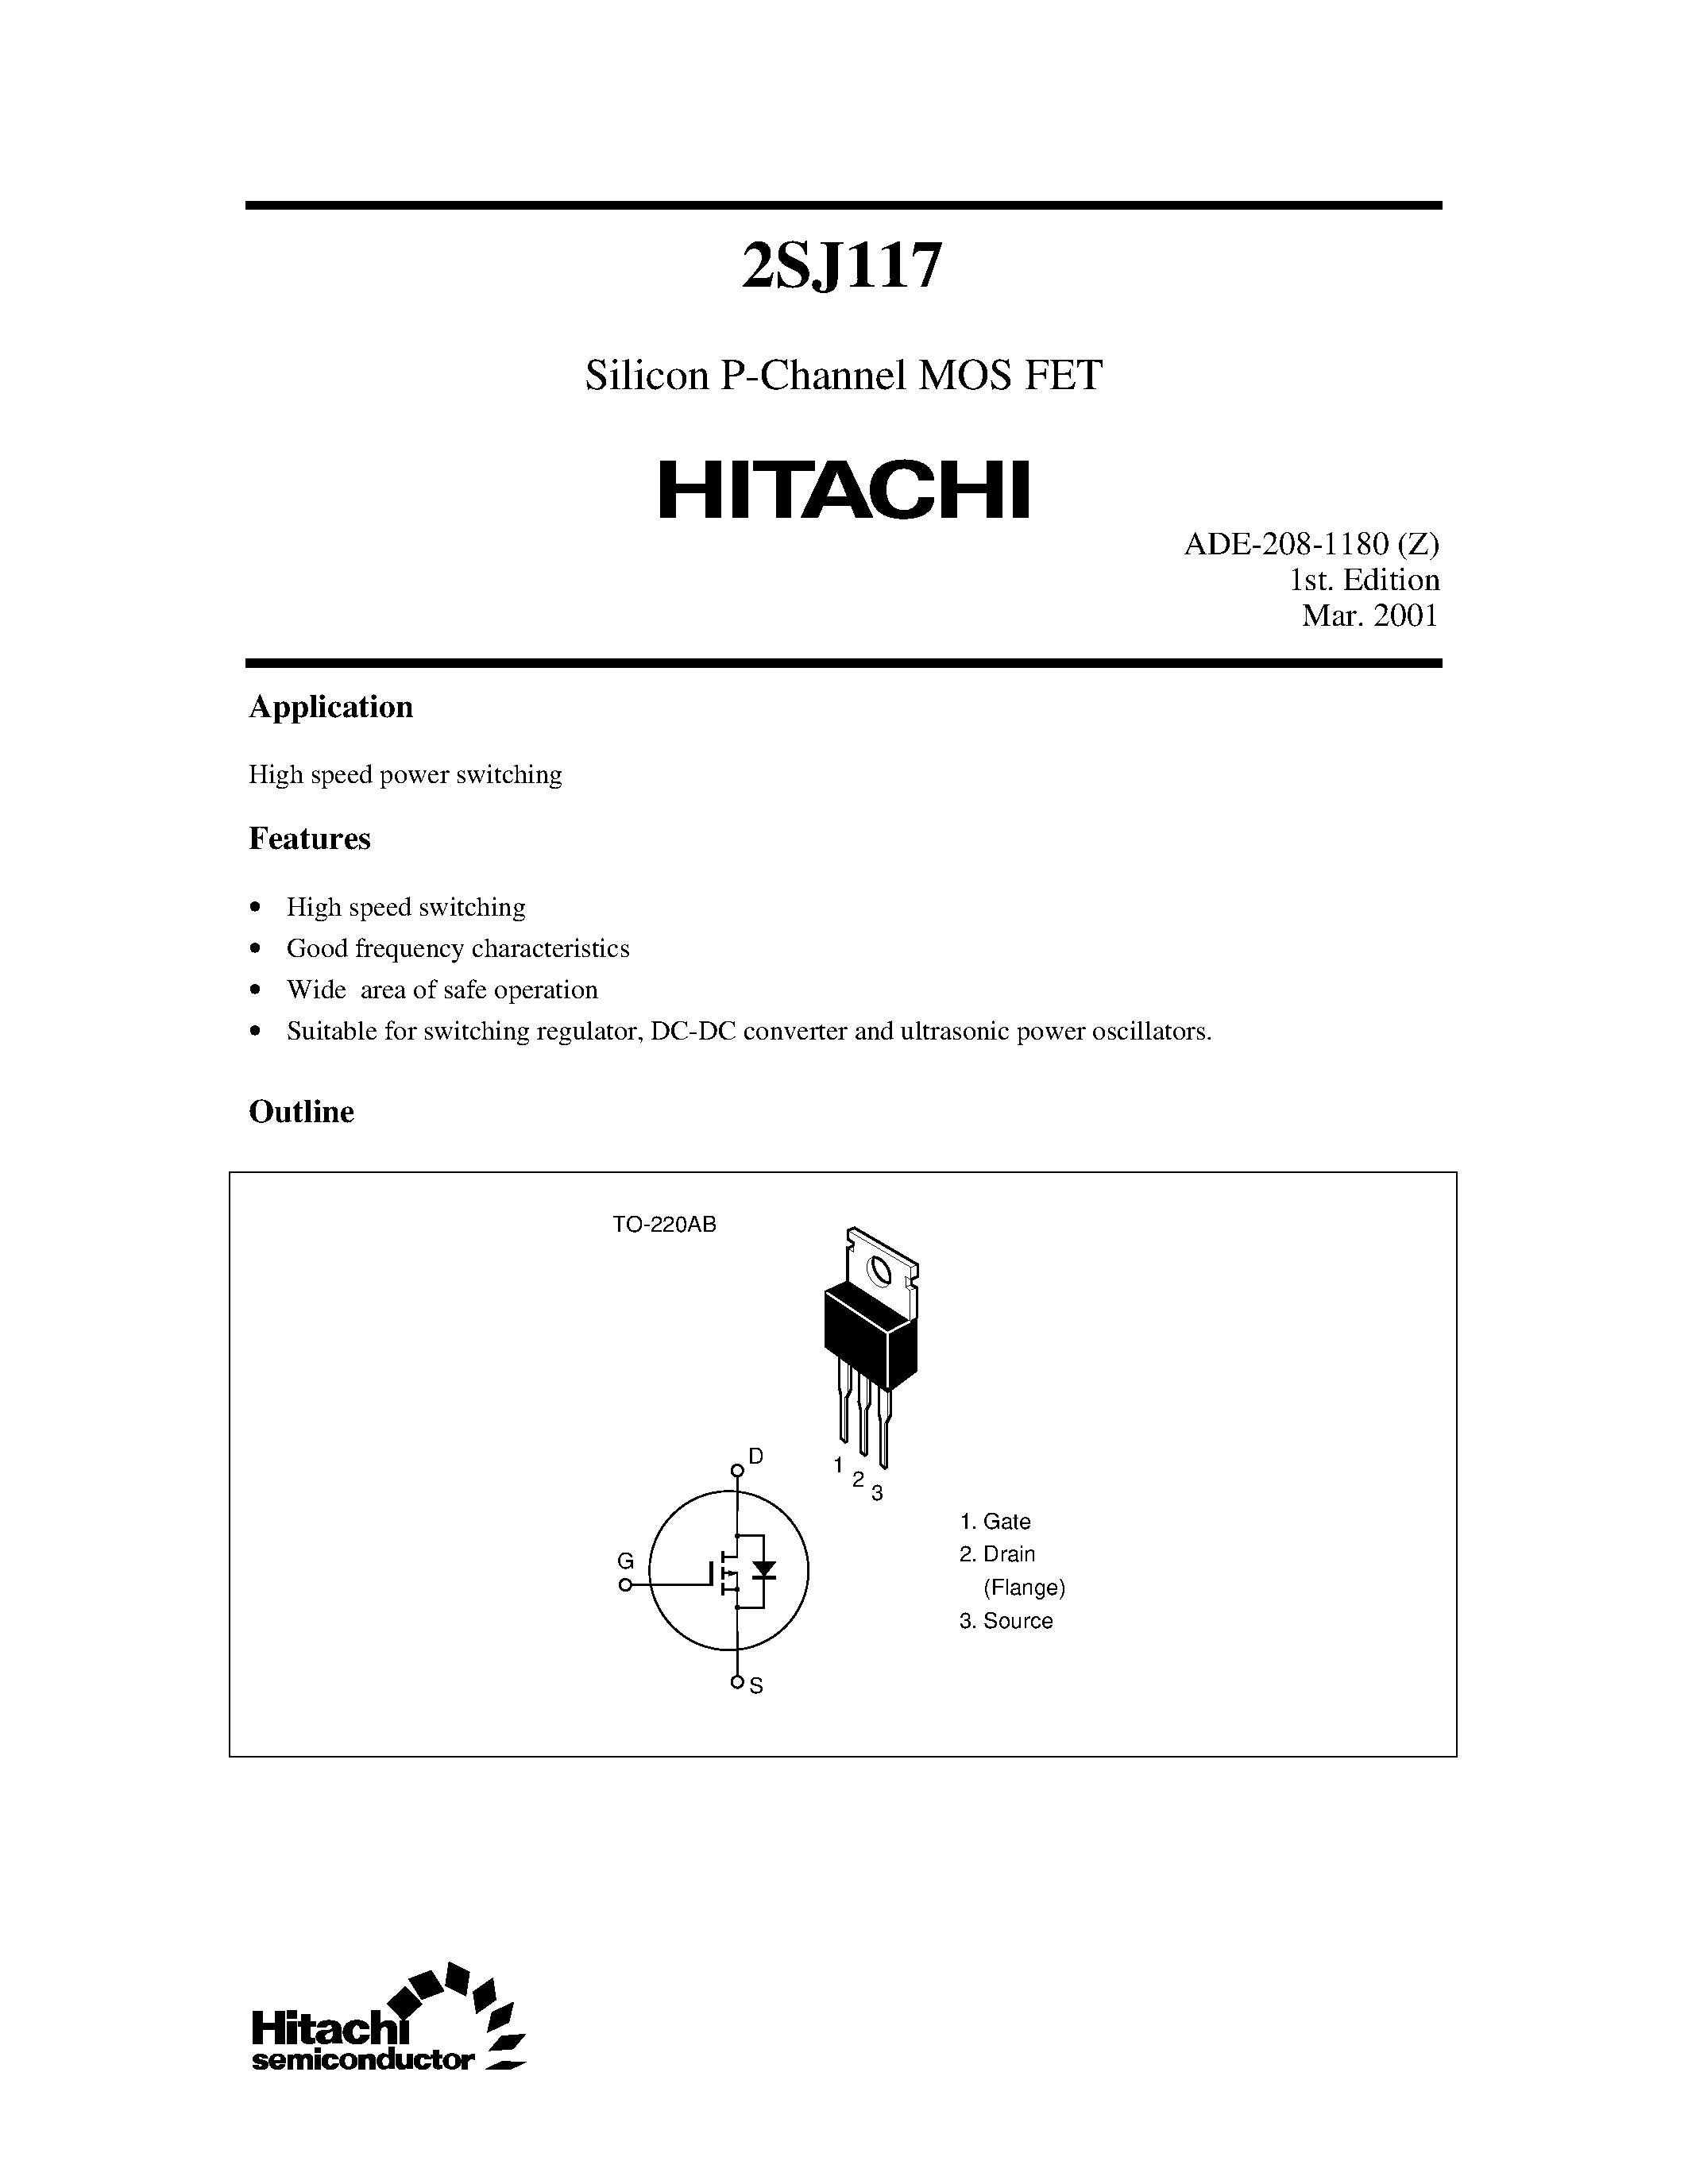 Datasheet 2SJ117 - Silicon P-Channel MOS FET page 1